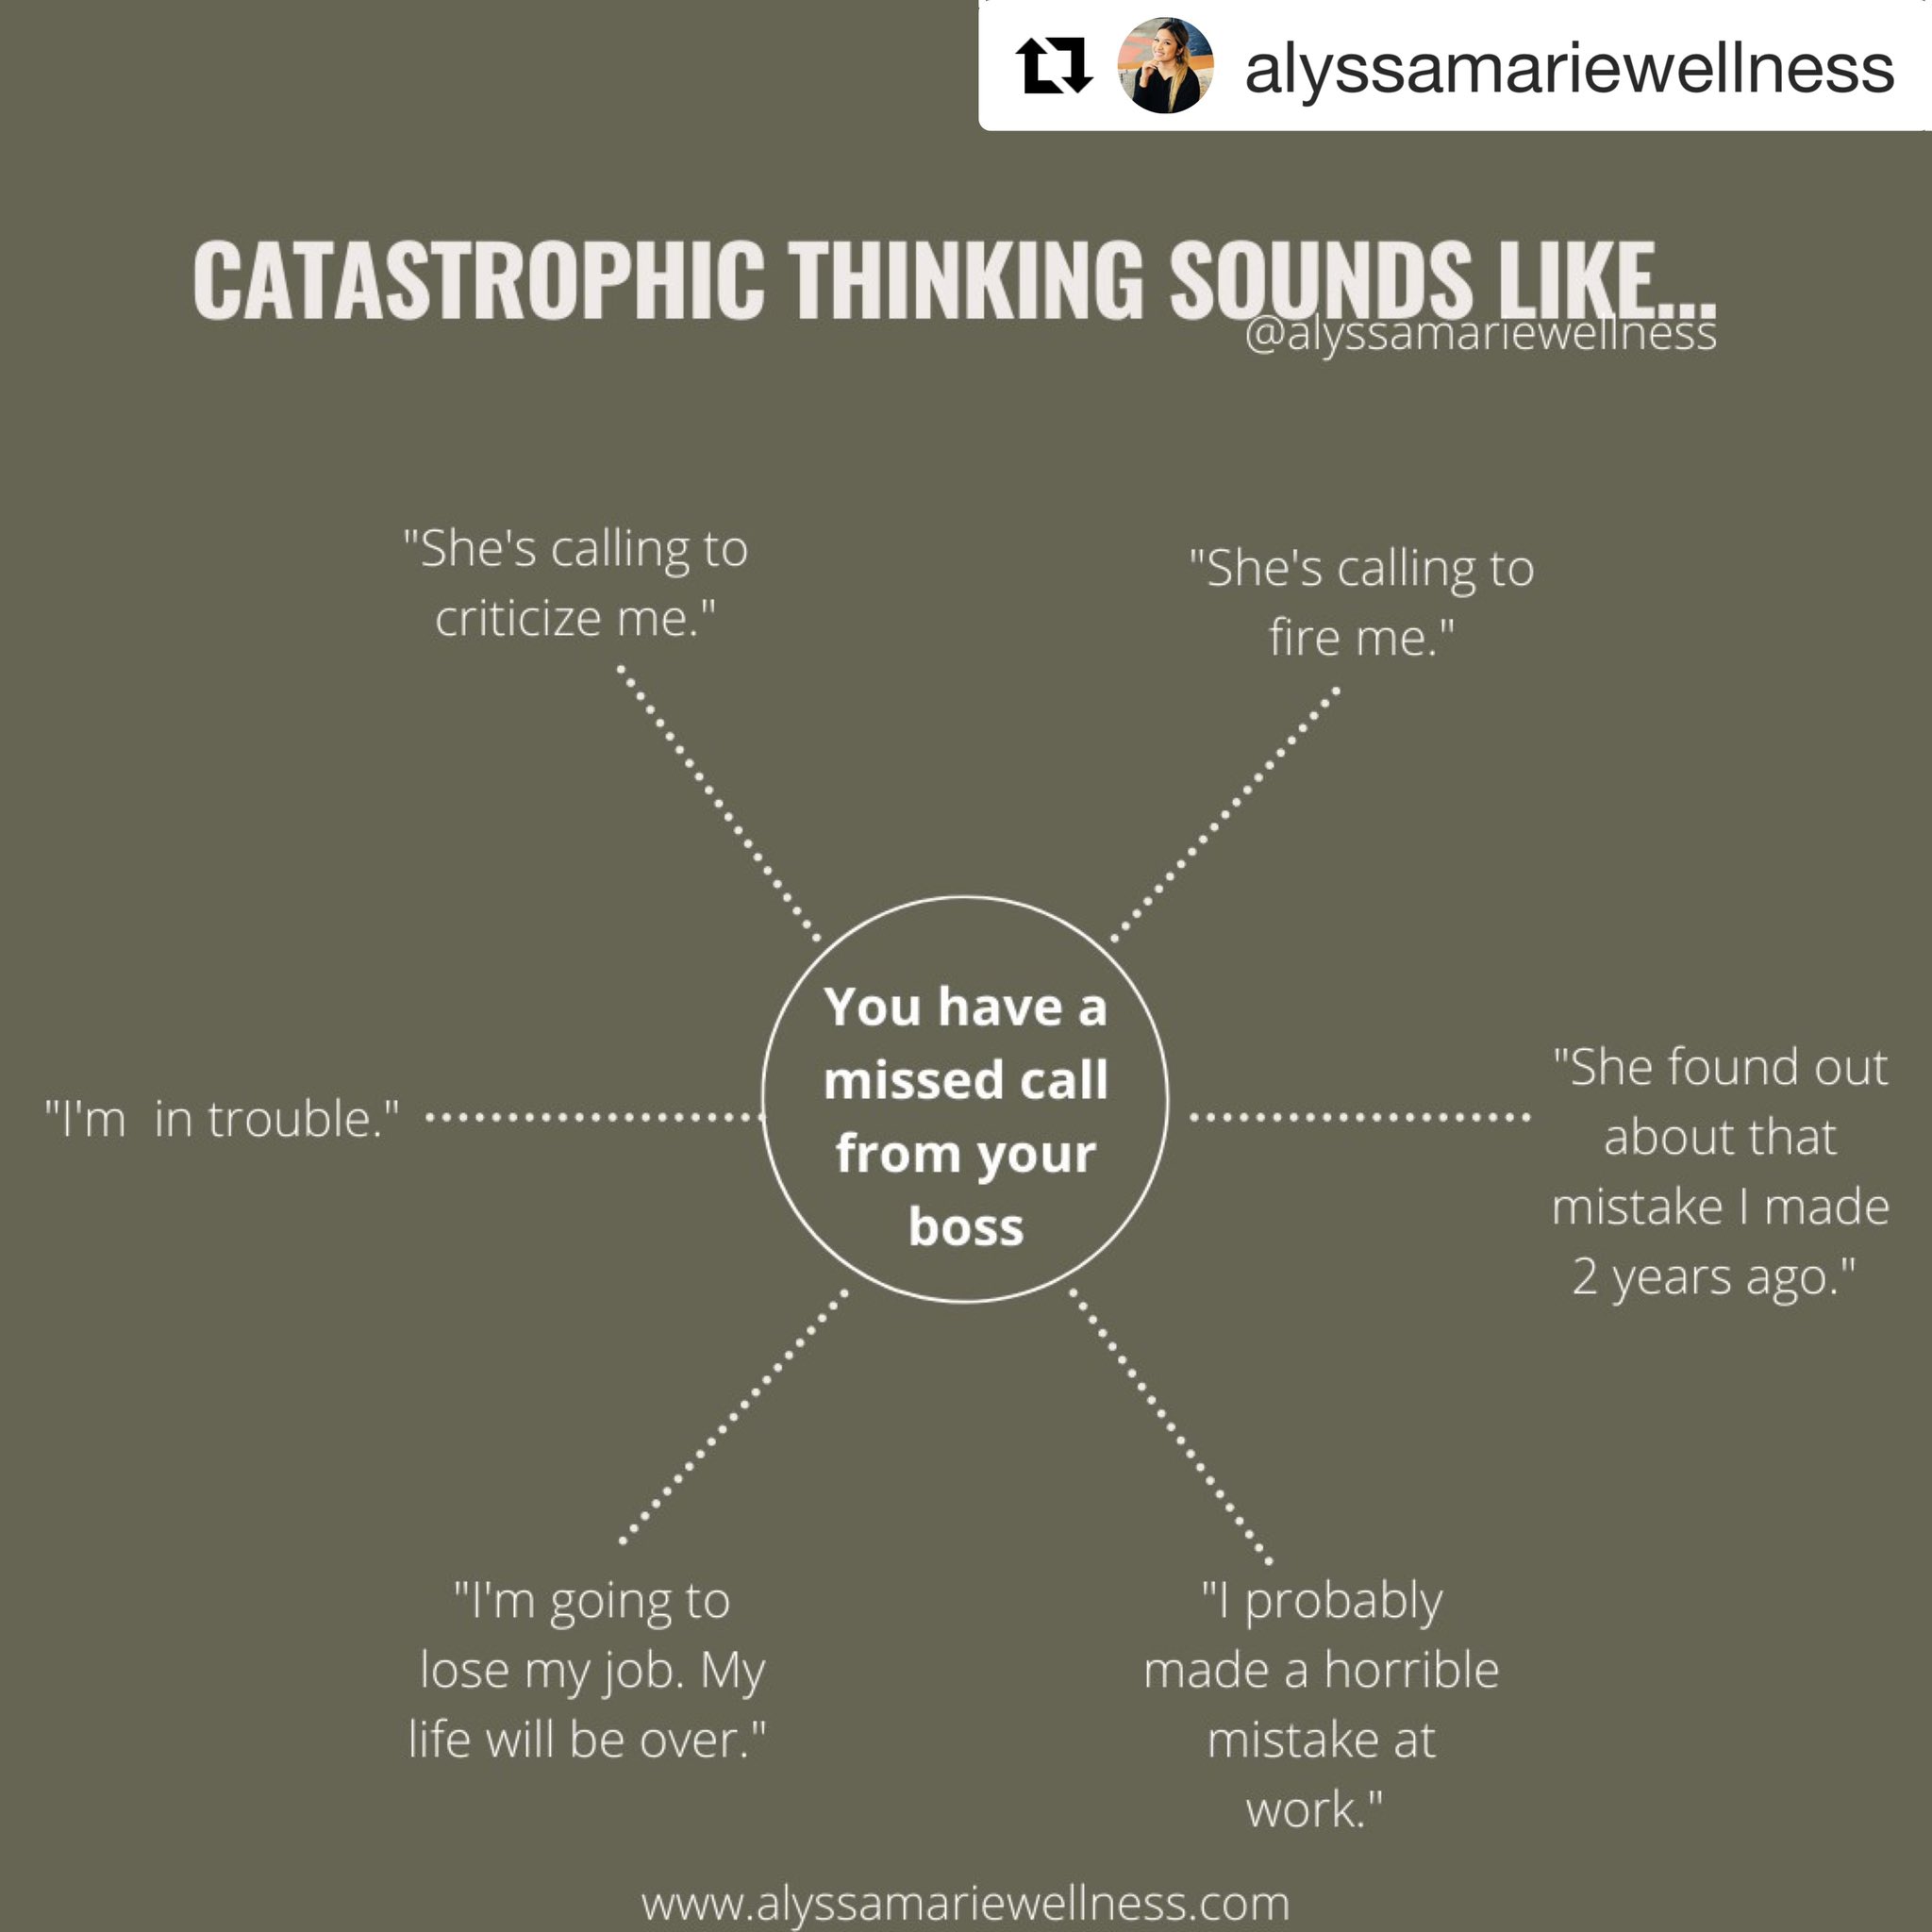 ANDREA GUNAWAN on X: “Strategies for challenging catastrophic thinking  incl: identifying worst case scenario, best case scenario, most likely  scenario; Explore What evidence do I have to support that this thought is